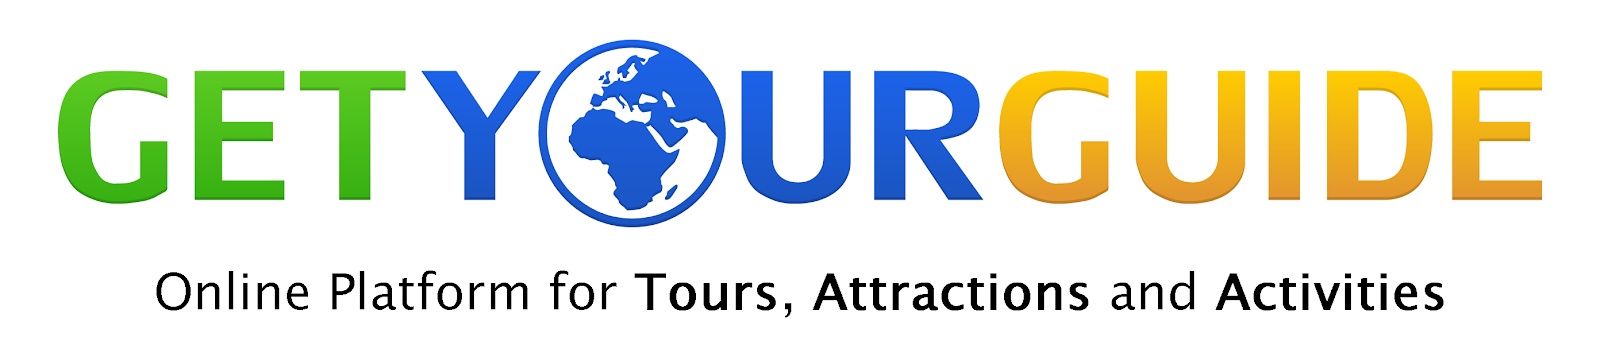 ONLINE PLATFORM FOR TOURS, ATTRACTIONS AND ACTIVITIES